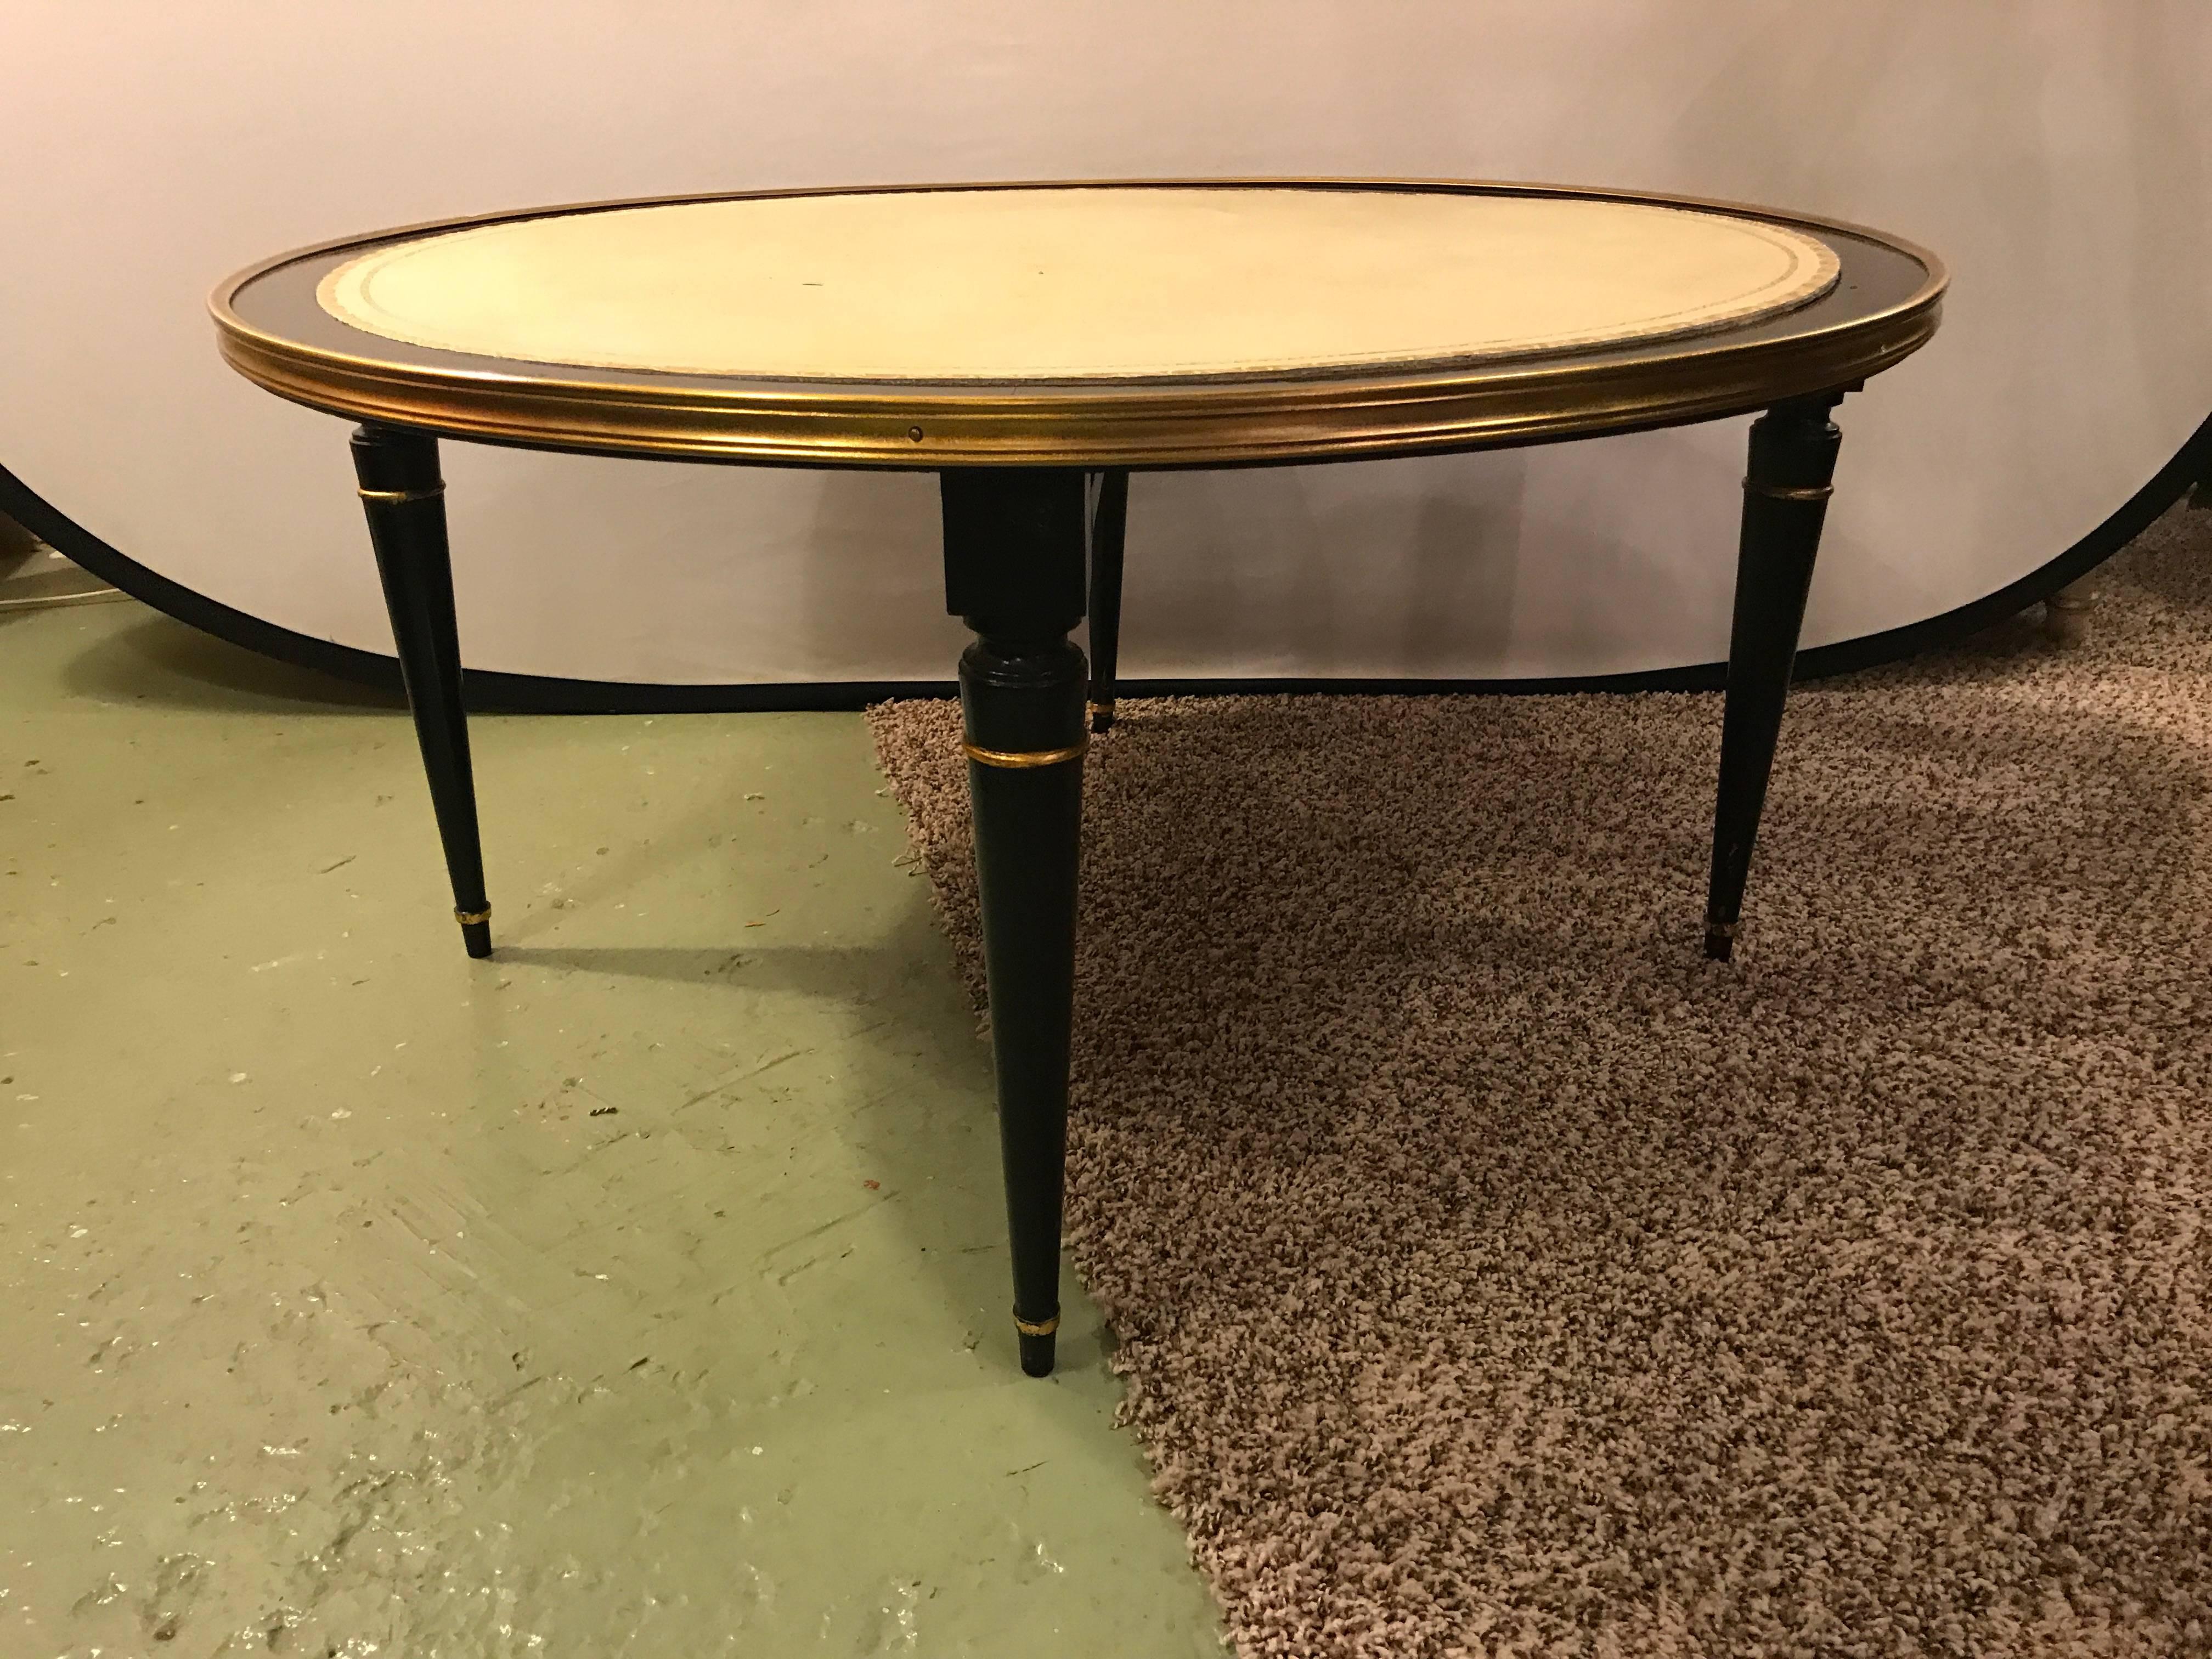 An ebonized Hollywood Regency coffee or low table with leather top. The circular leather top having an ebony border sitting on Louis XVI styled legs in an ebony and gilt decorated finish.